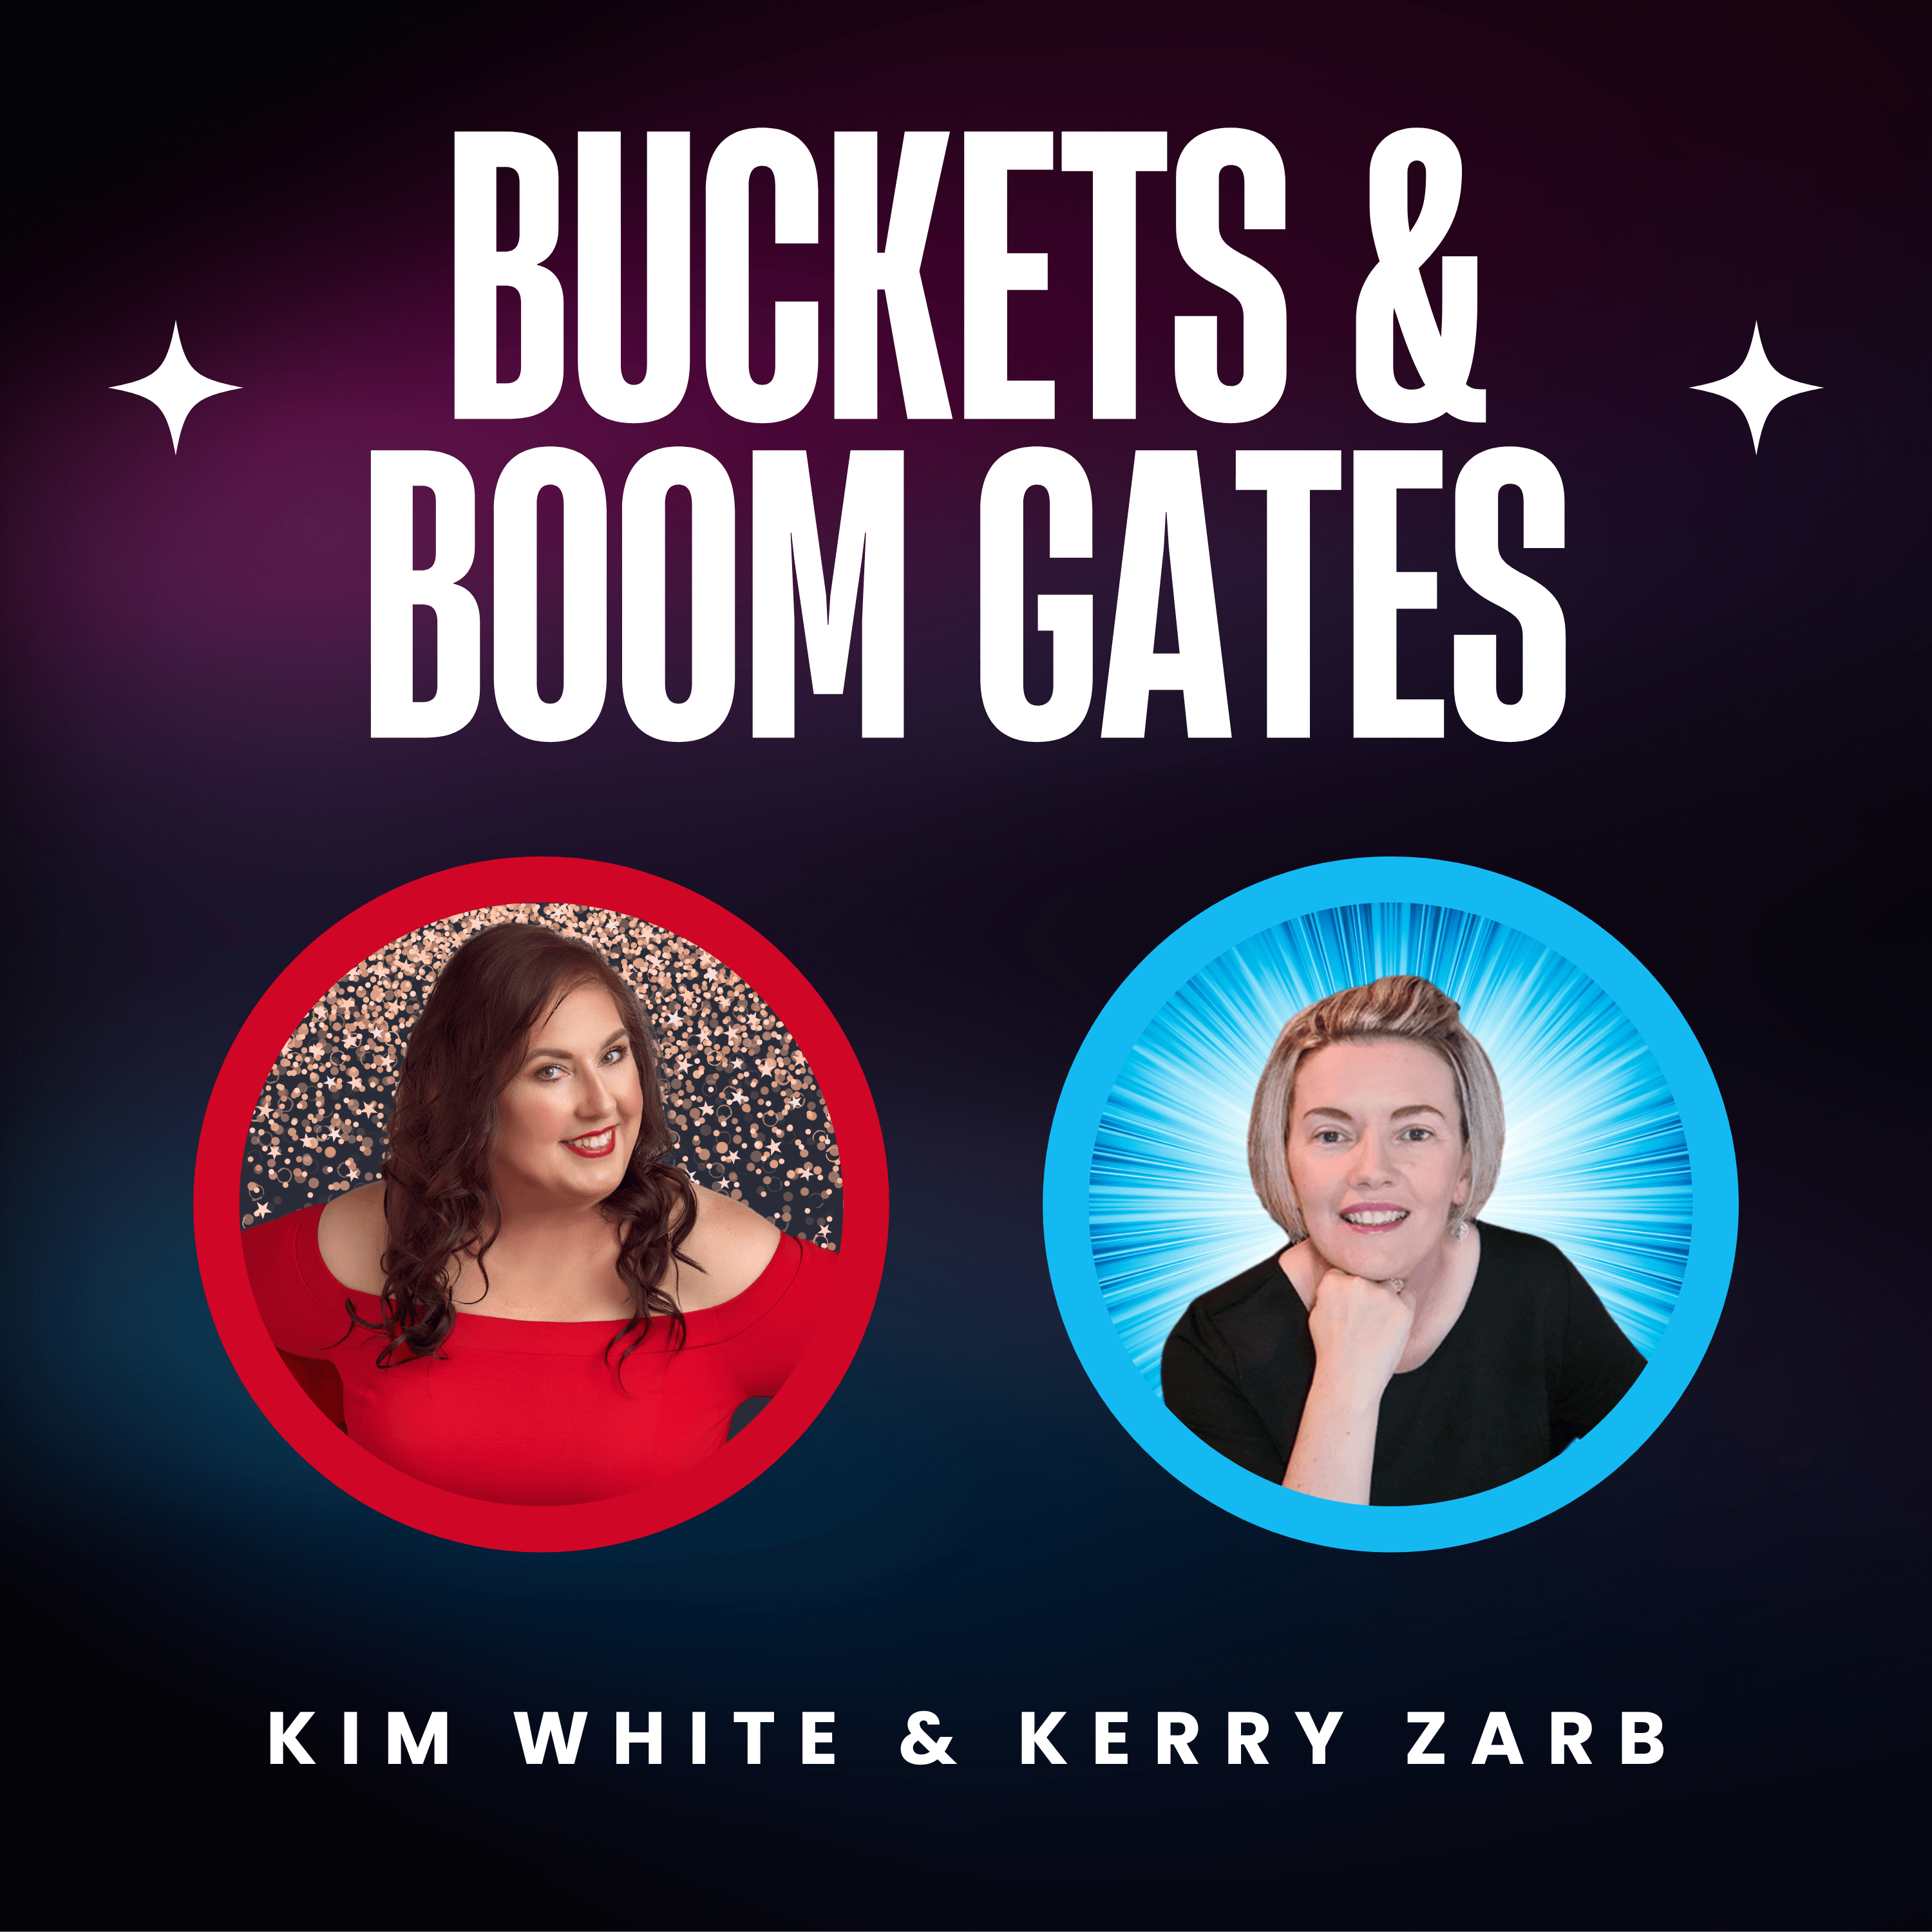 Artwork for podcast Buckets & Boom Gates